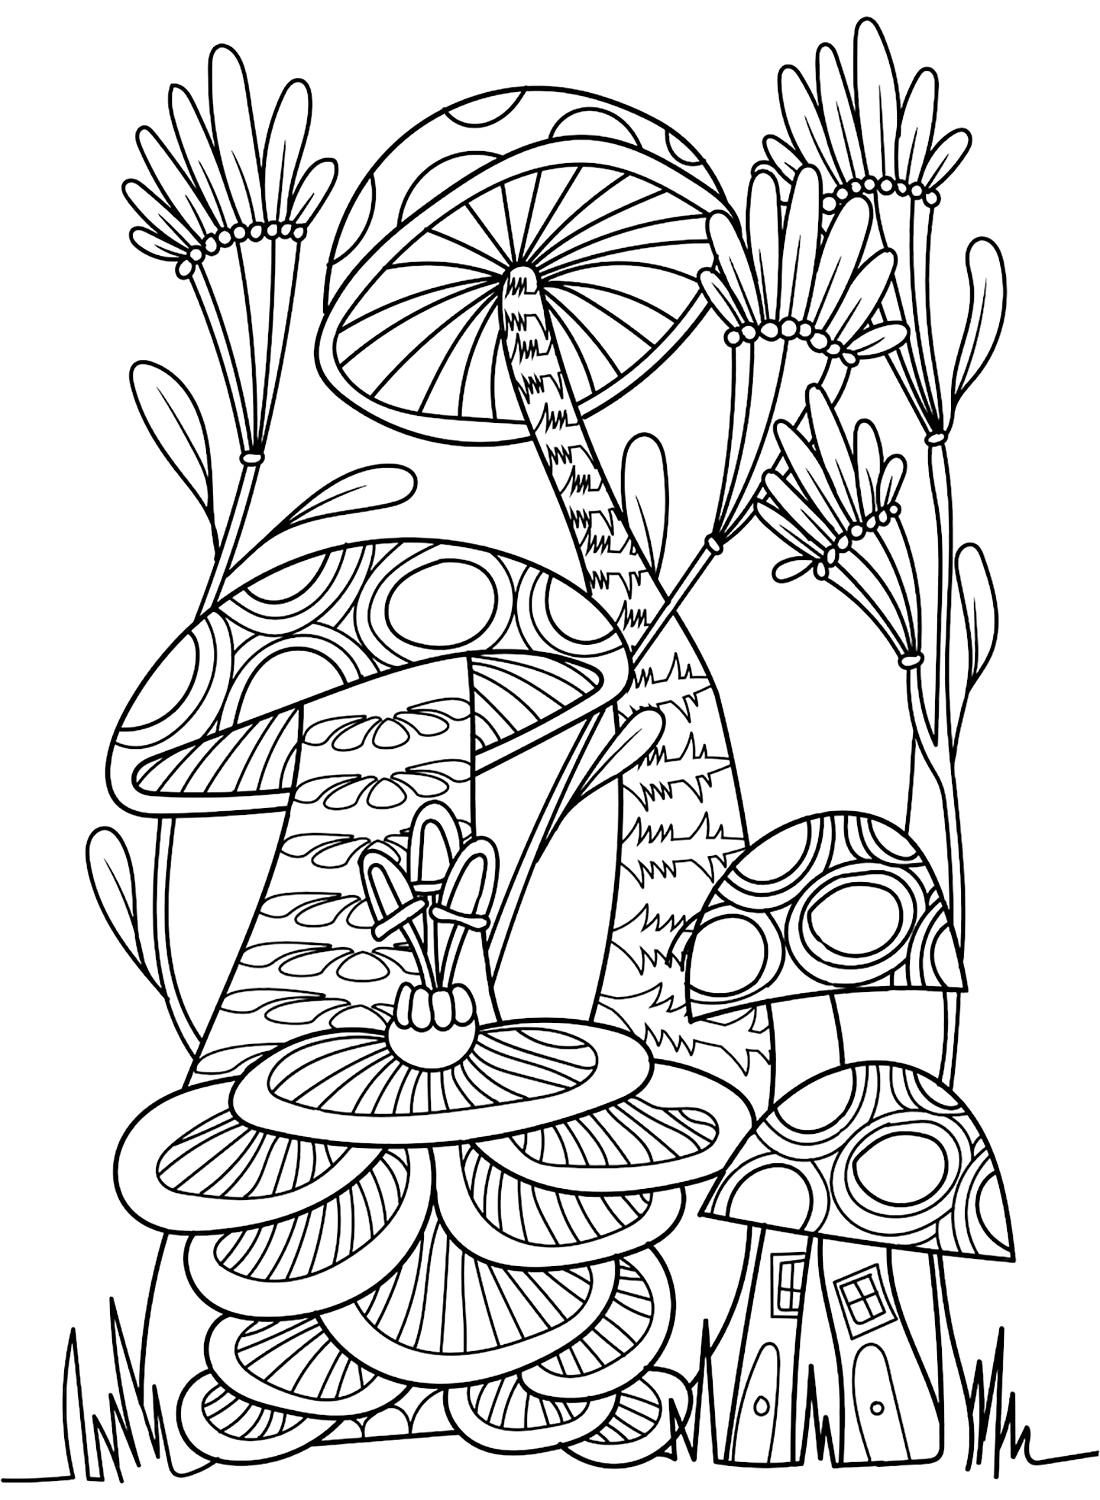 Coloring Pages Mushroom